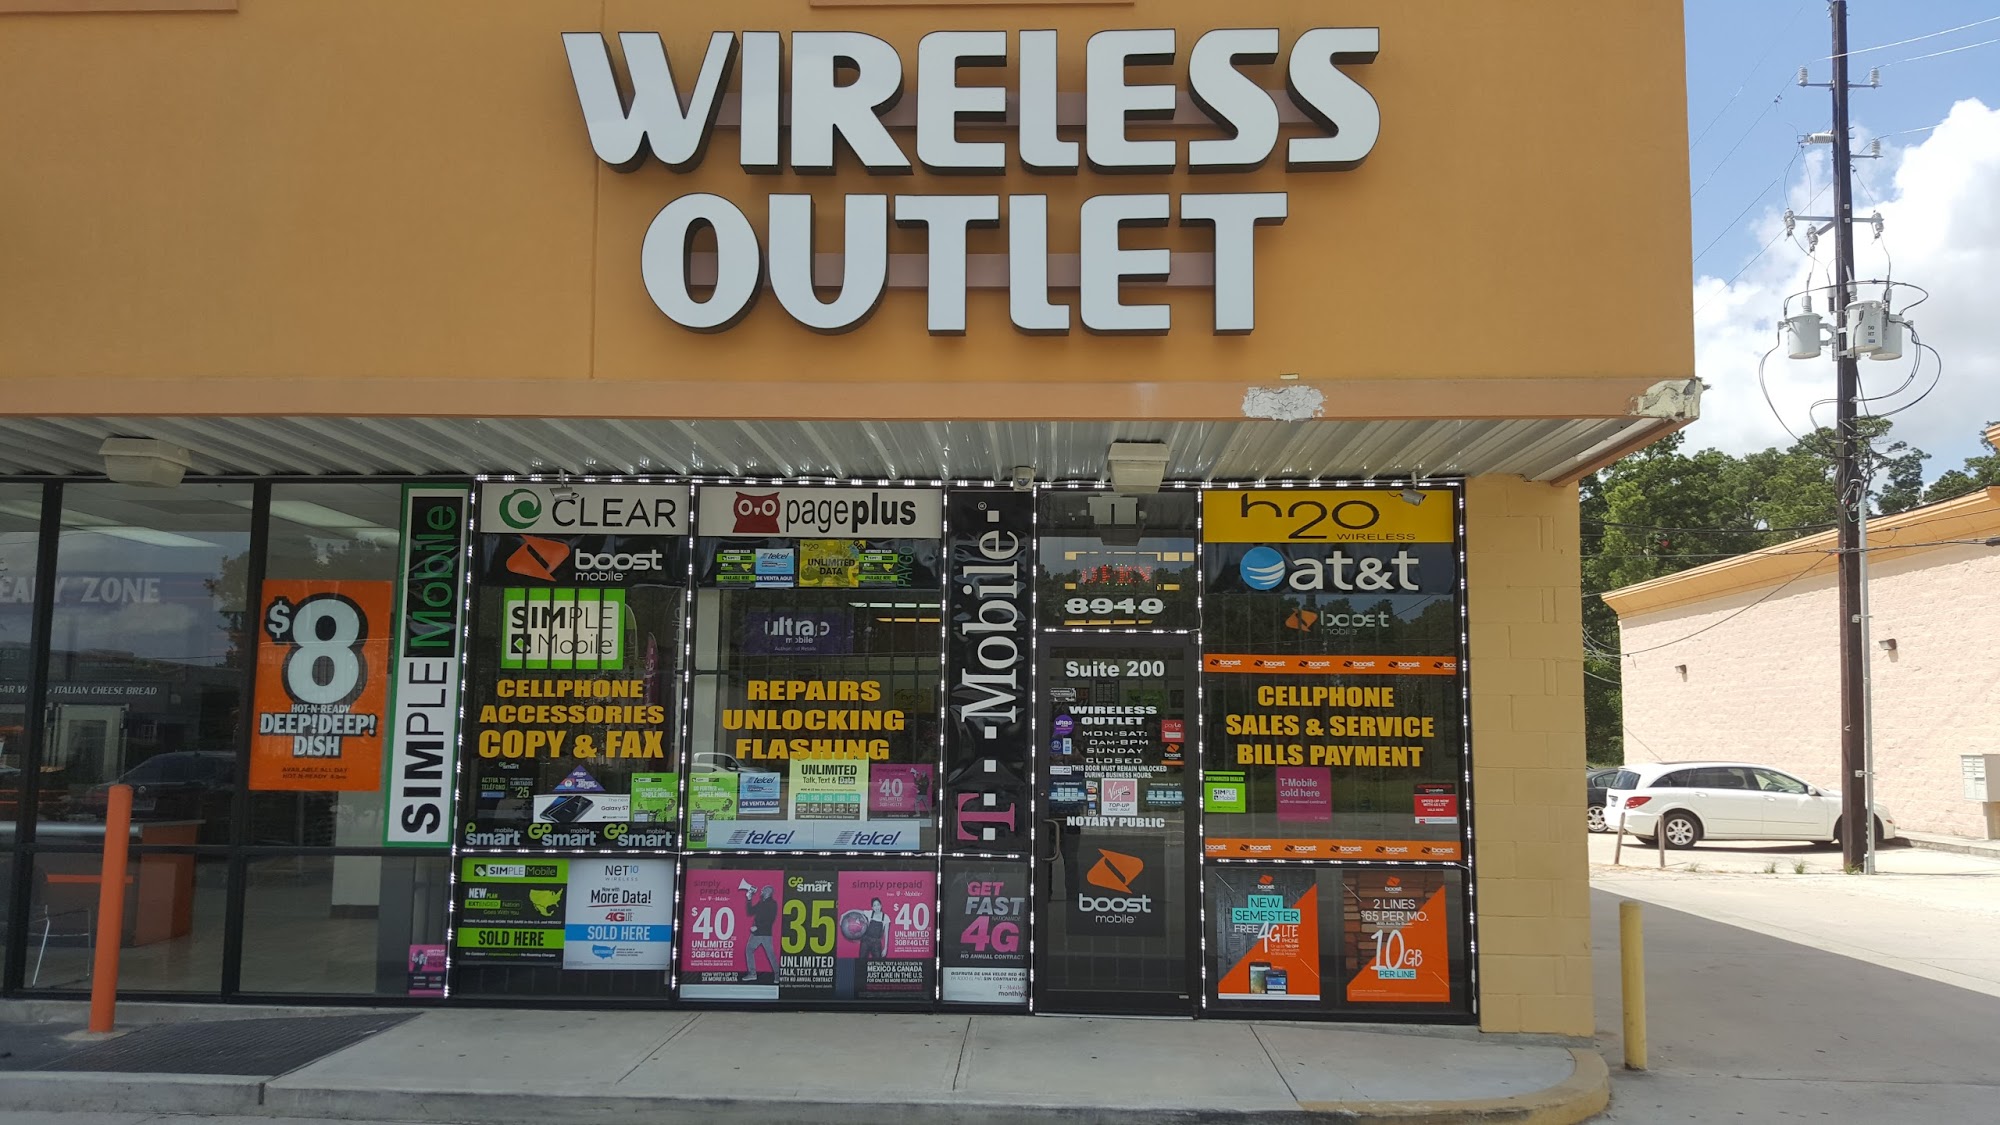 Wireless Outlet